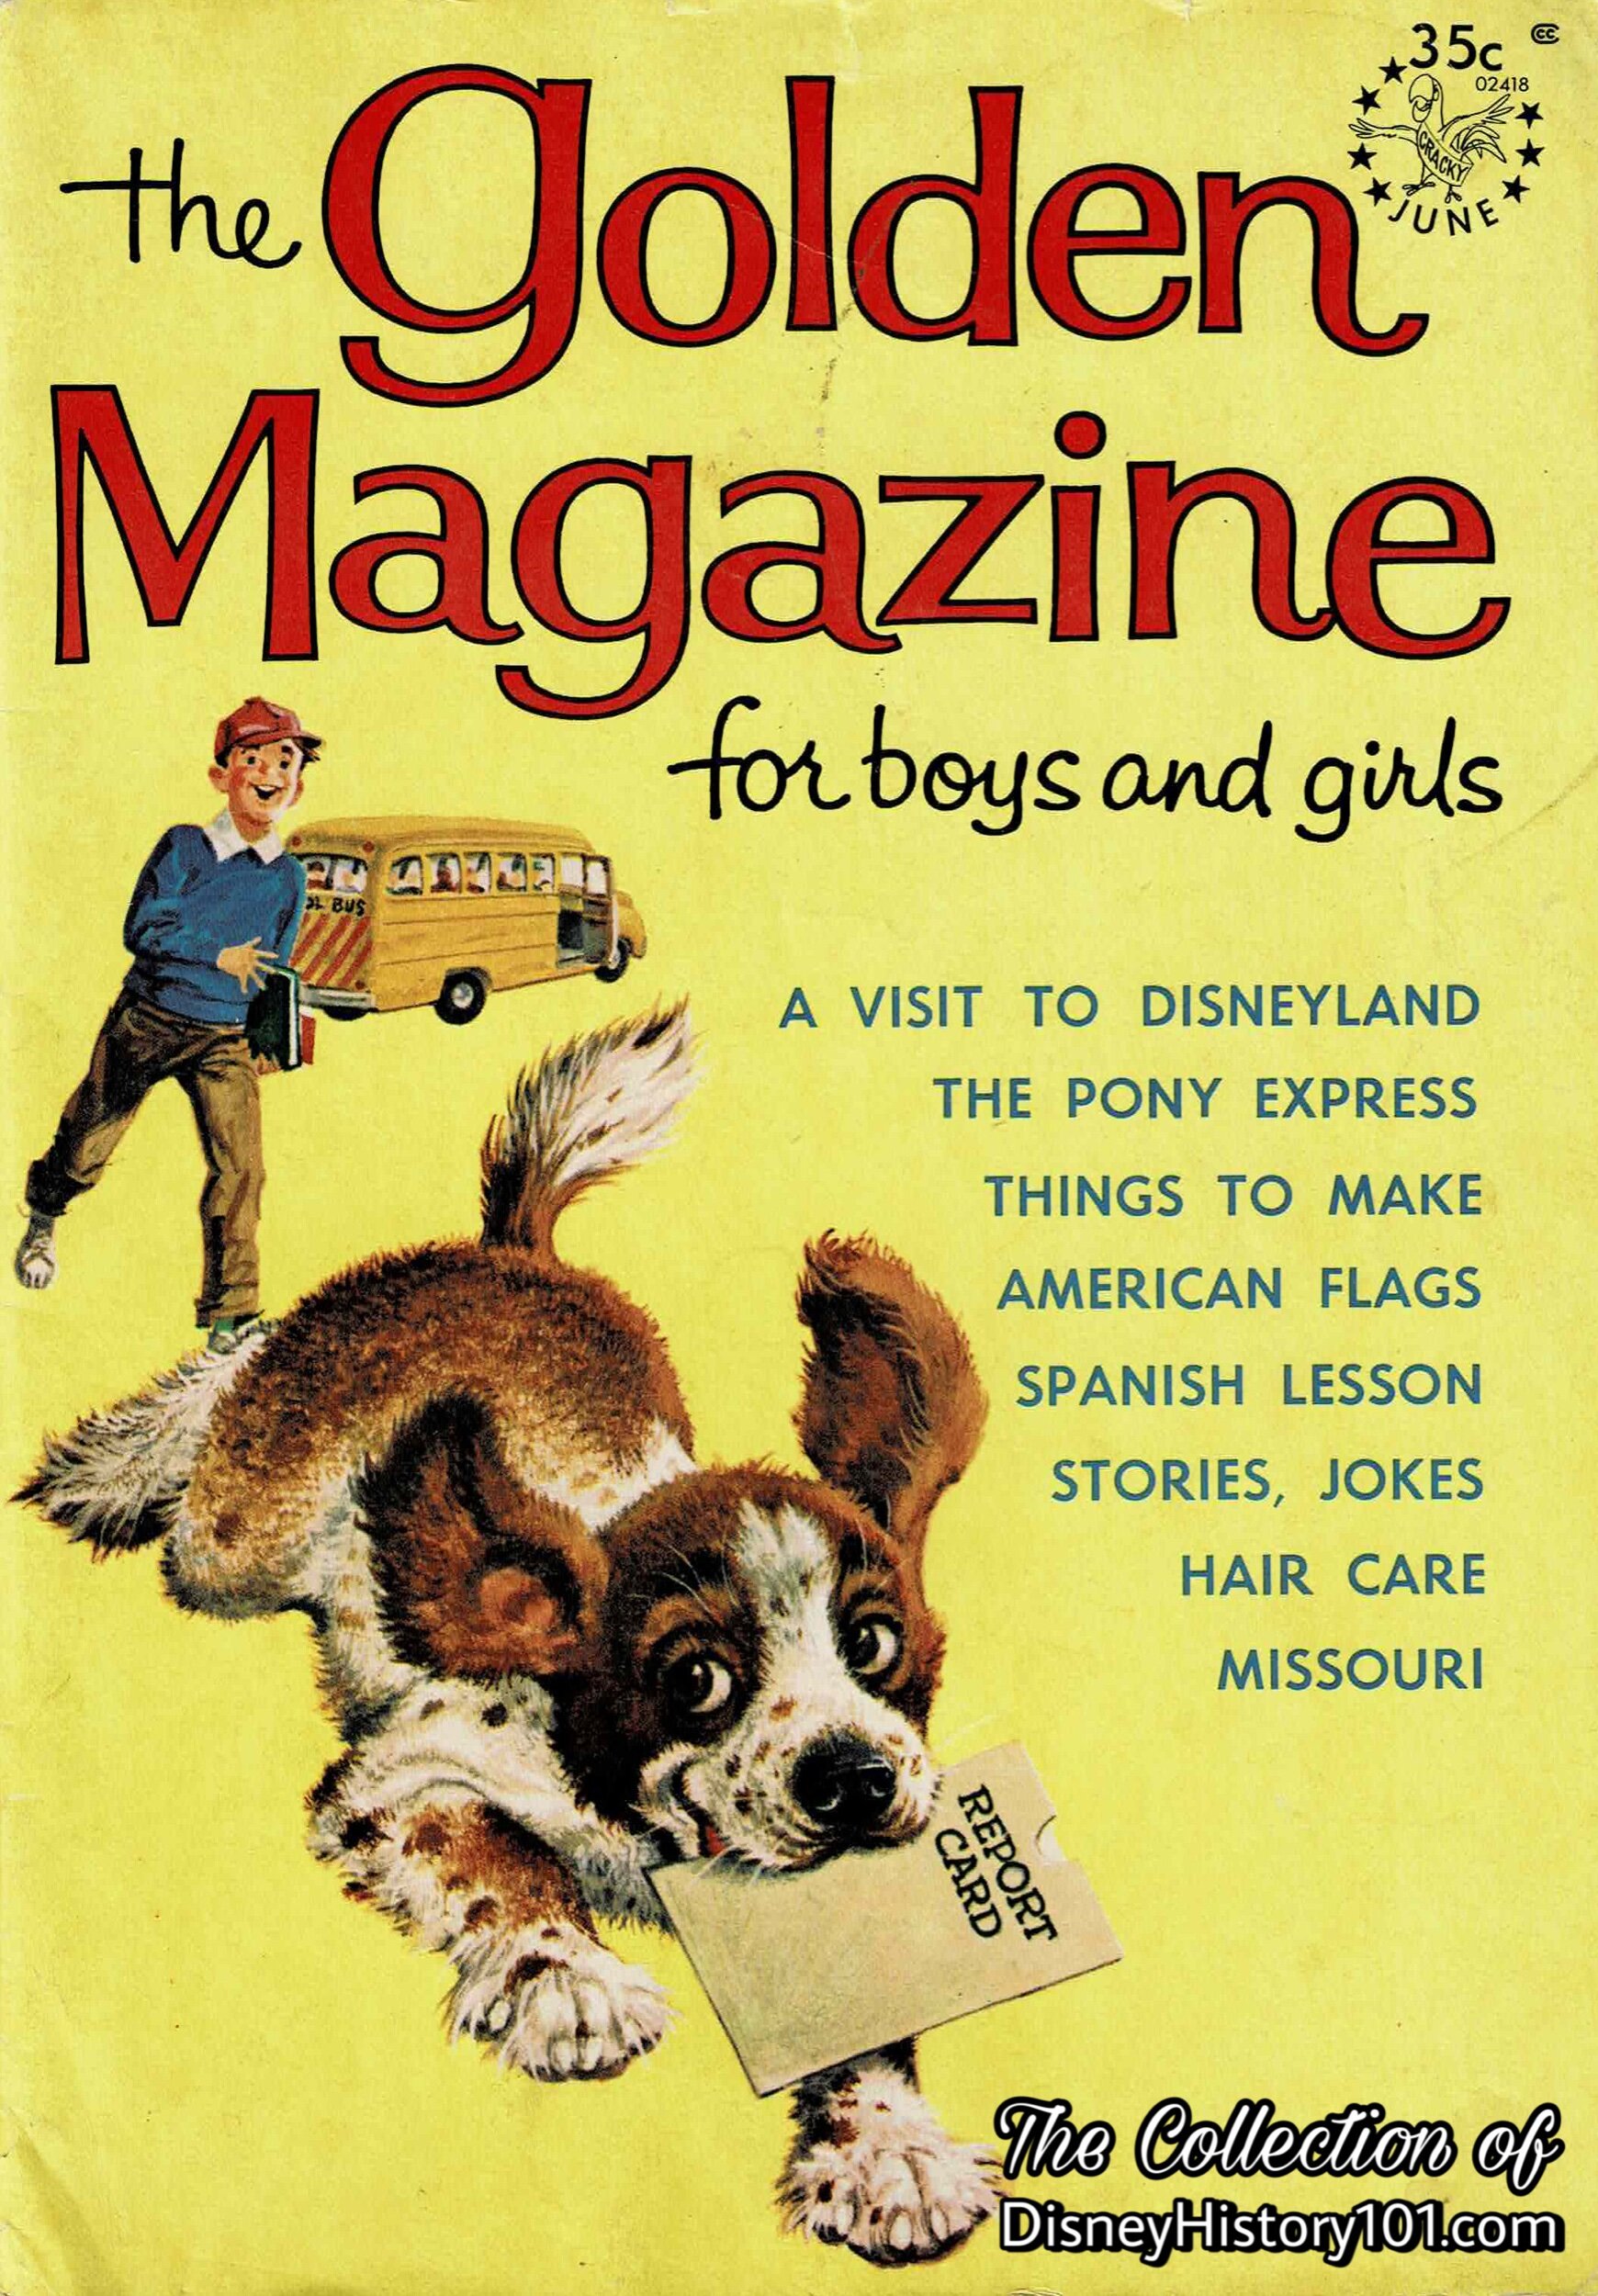 The Golden Magazine for Boys and Girls, June of 1965.